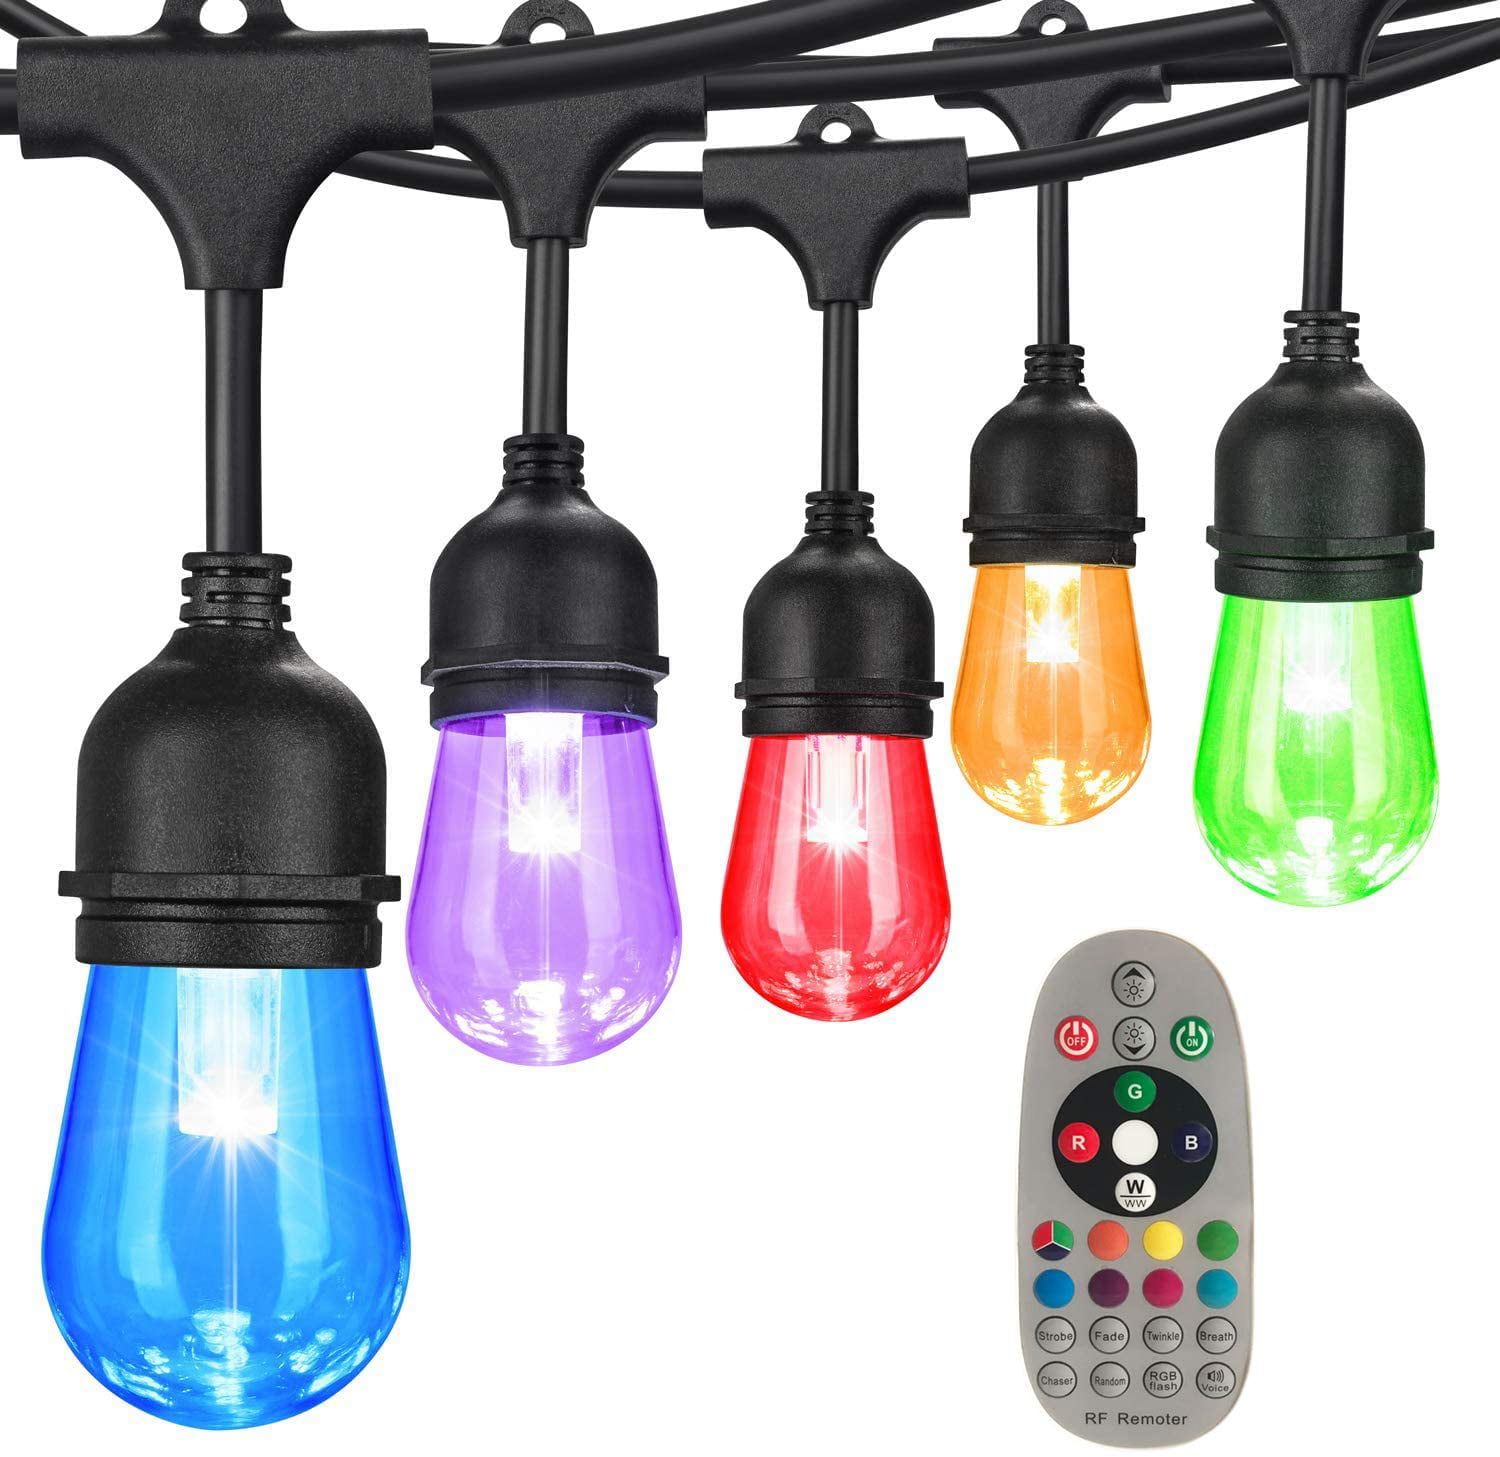 Dgo Color Changing String Lights, Best Outdoor String Lights With Remote